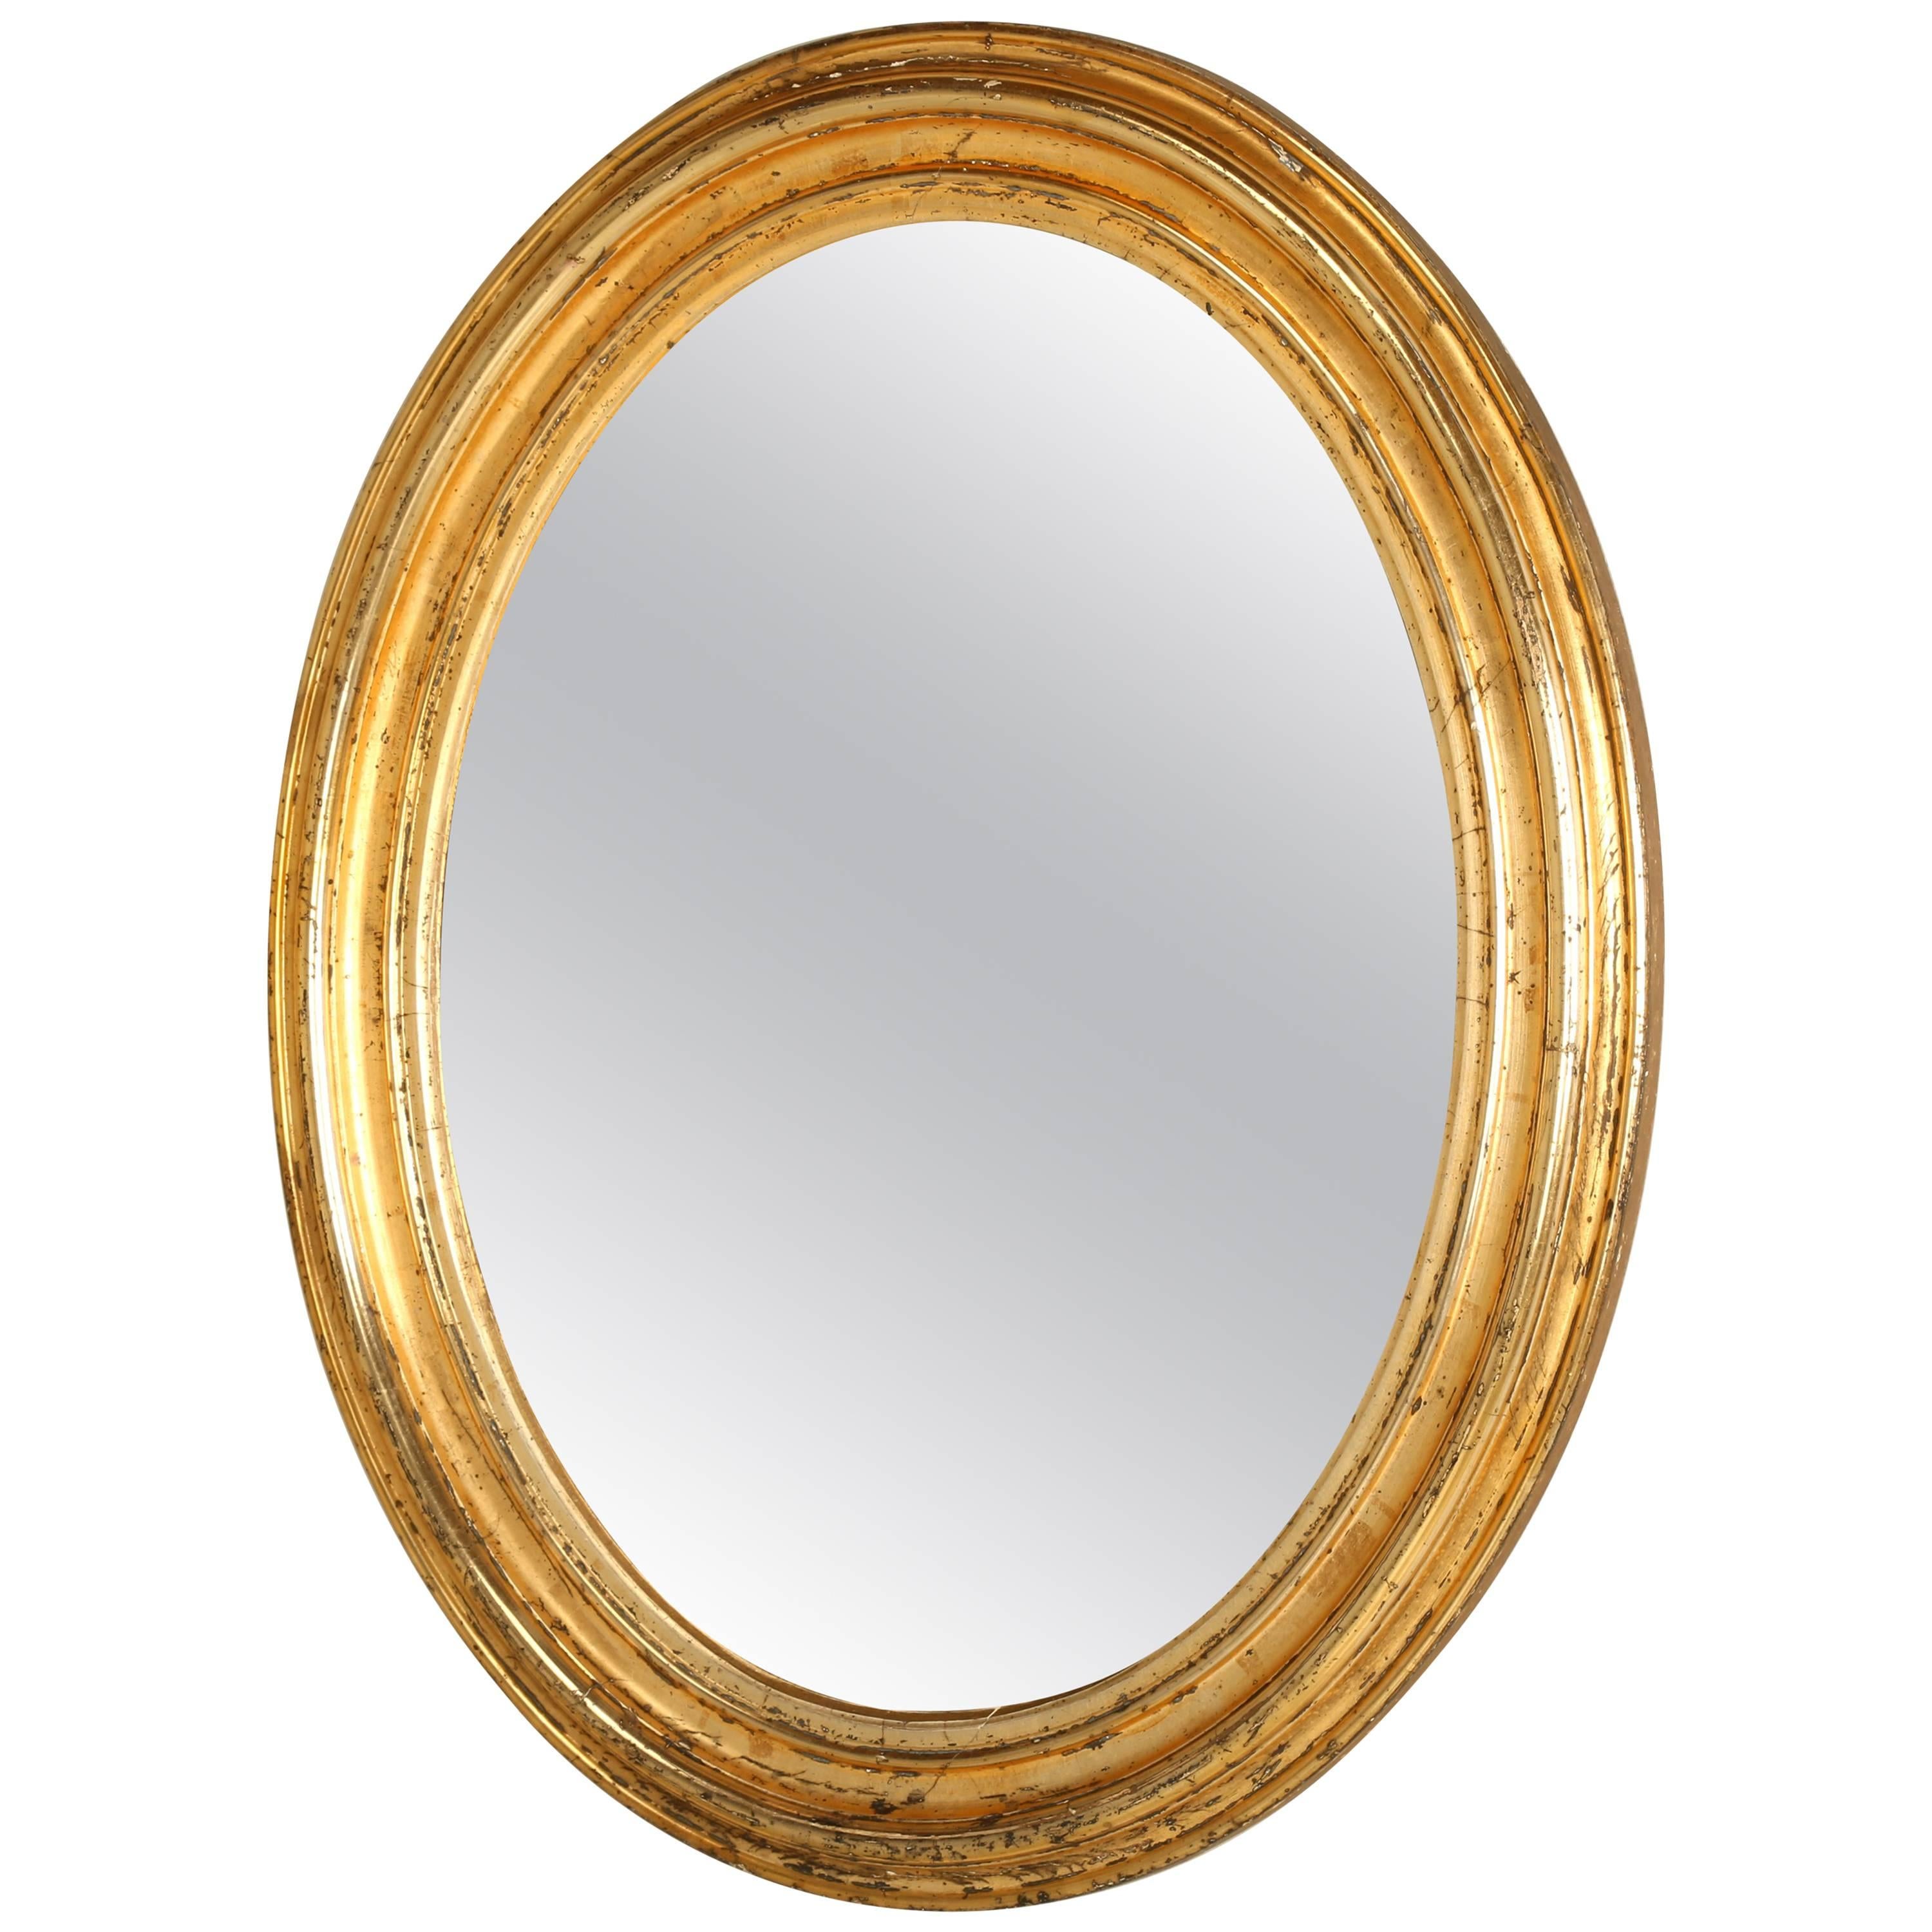 Antique French Oval Gilt Mirror, Still in Its Original Beautiful Condition